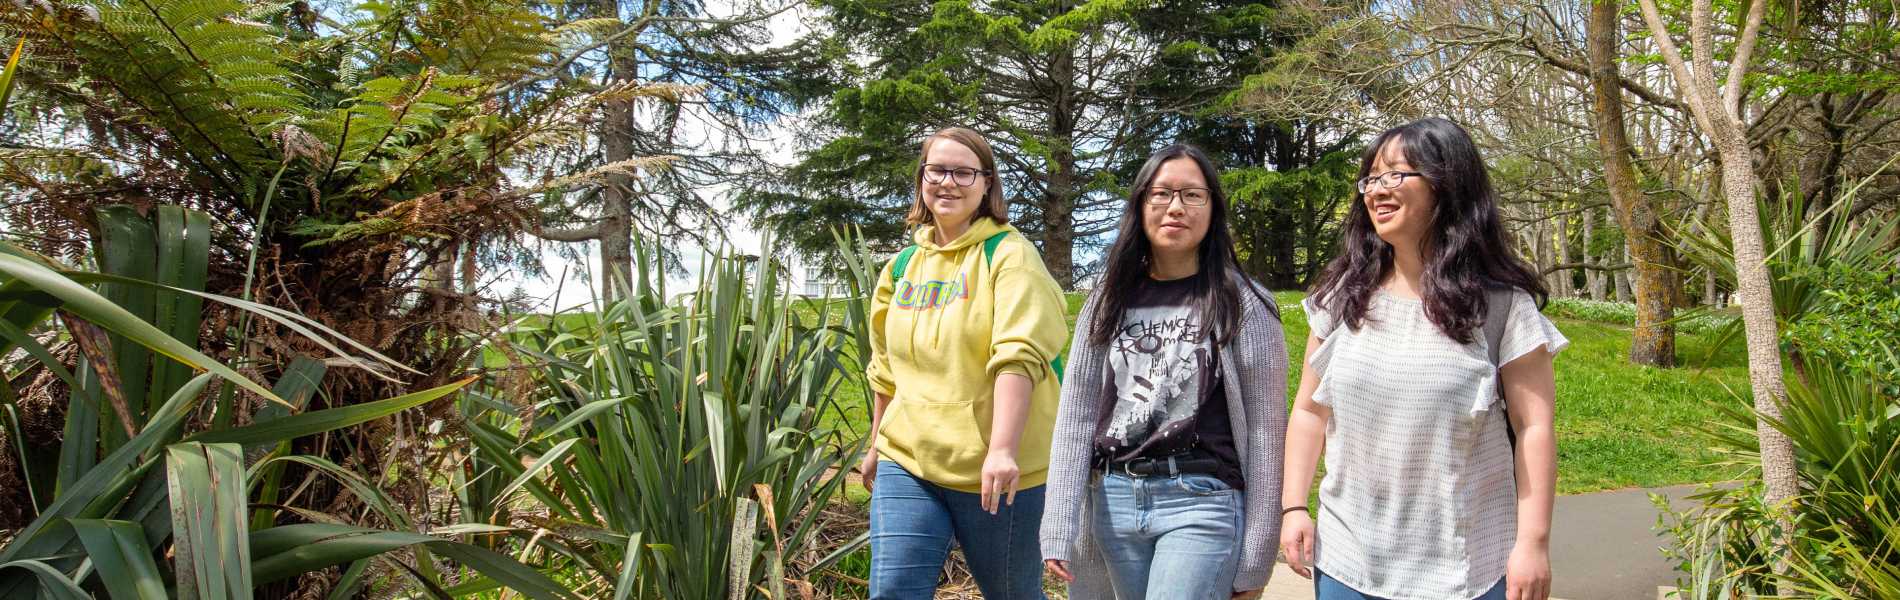 Students on campus at the University of Waikato 42 2